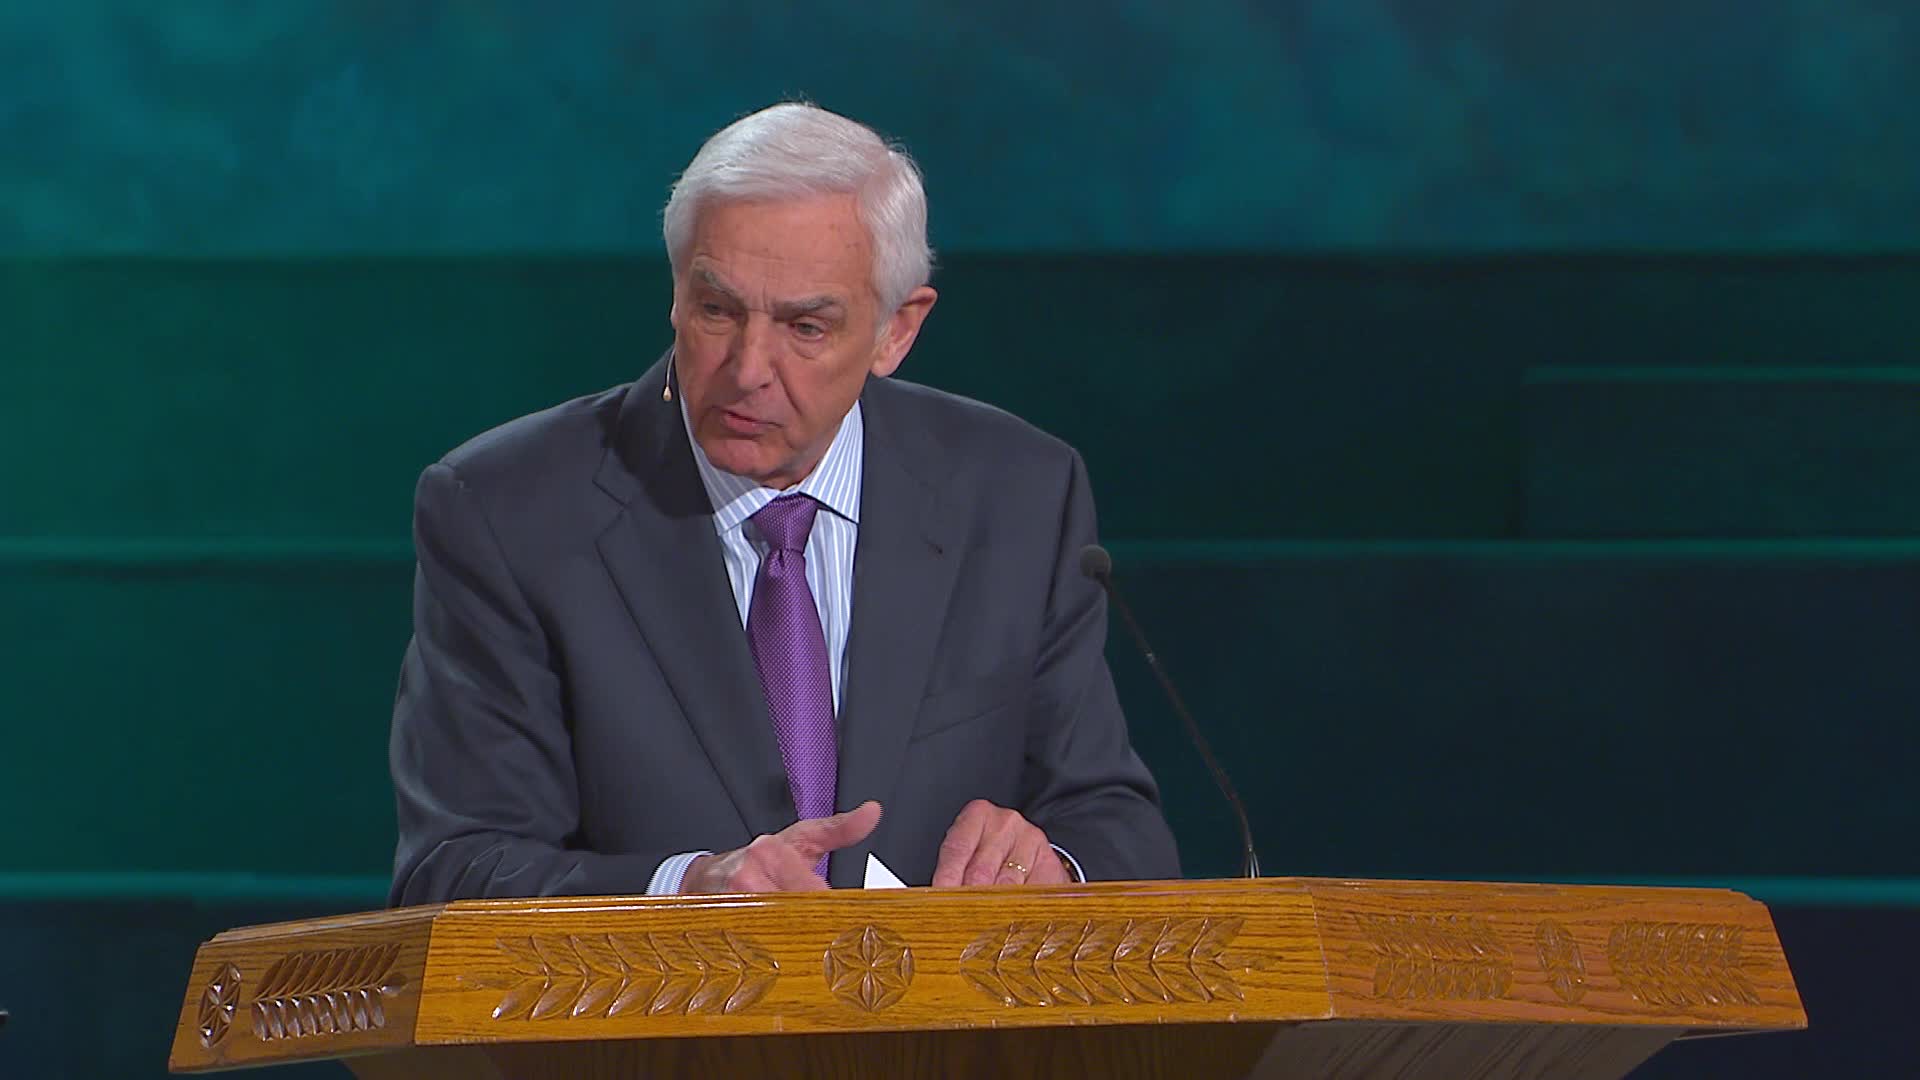 The Scroll Produces the Tears of John by Prophecy Academy  with Dr. David Jeremiah